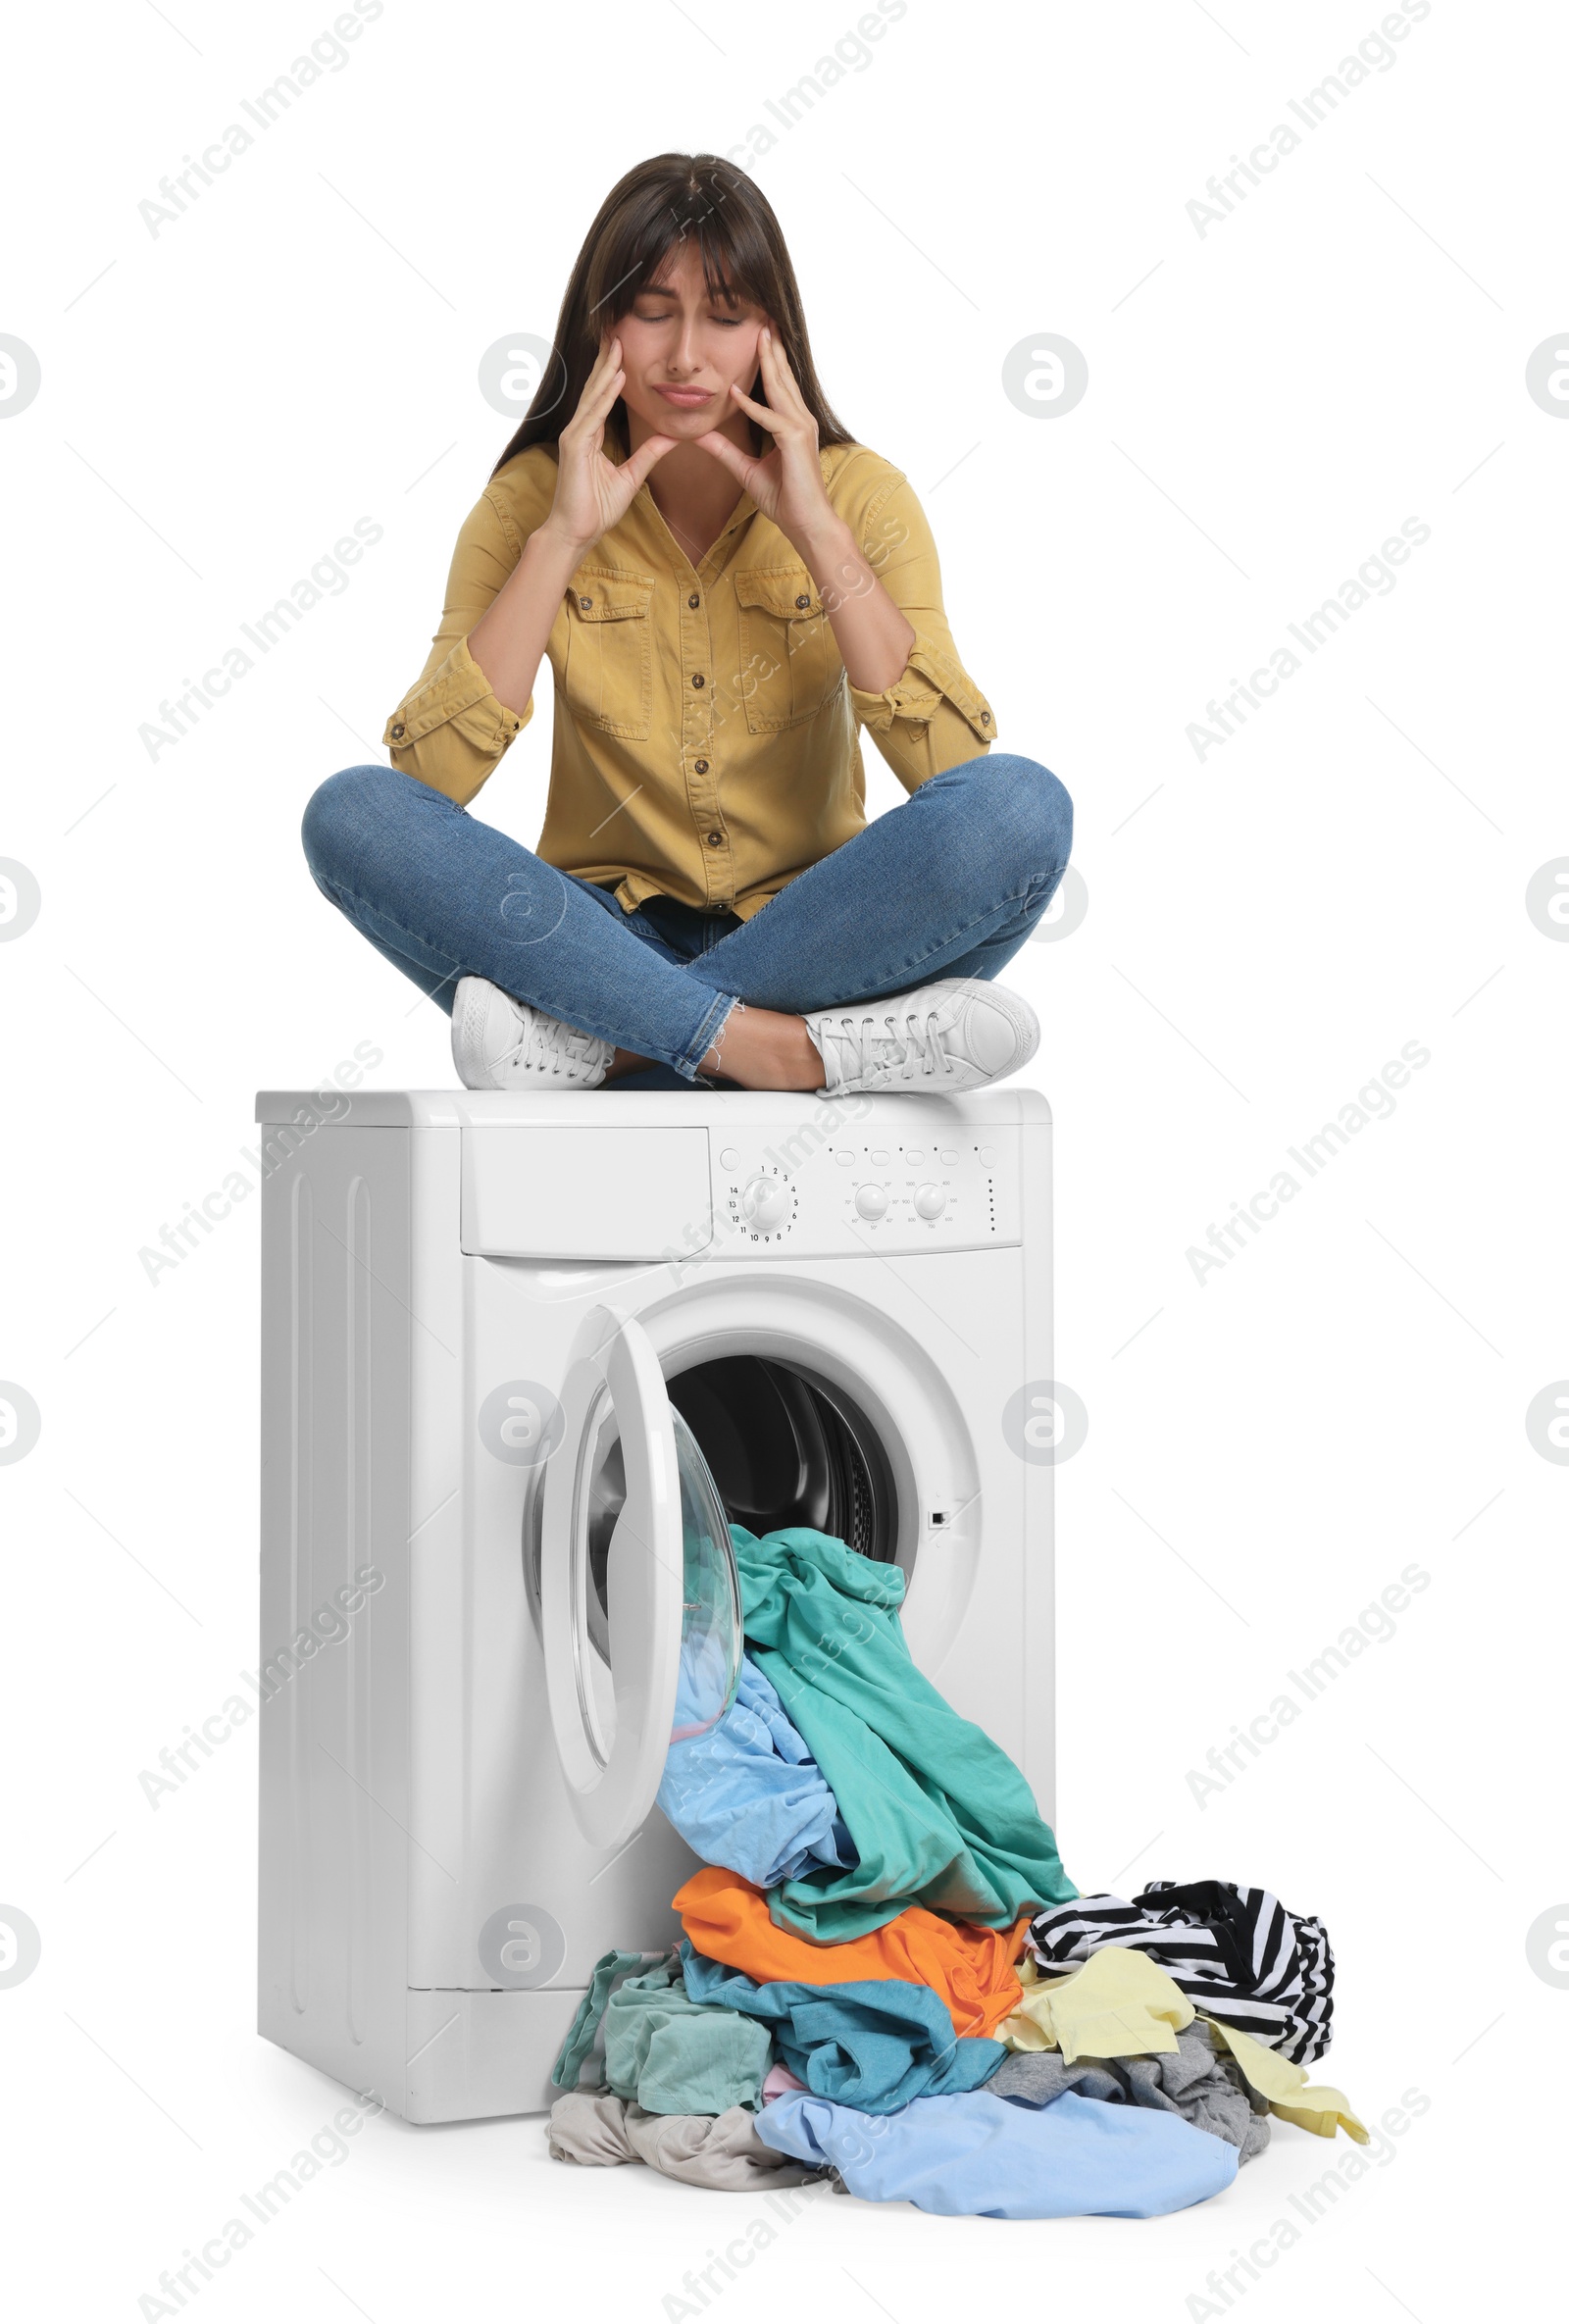 Photo of Confused woman sitting on washing machine with scattered laundry against white background